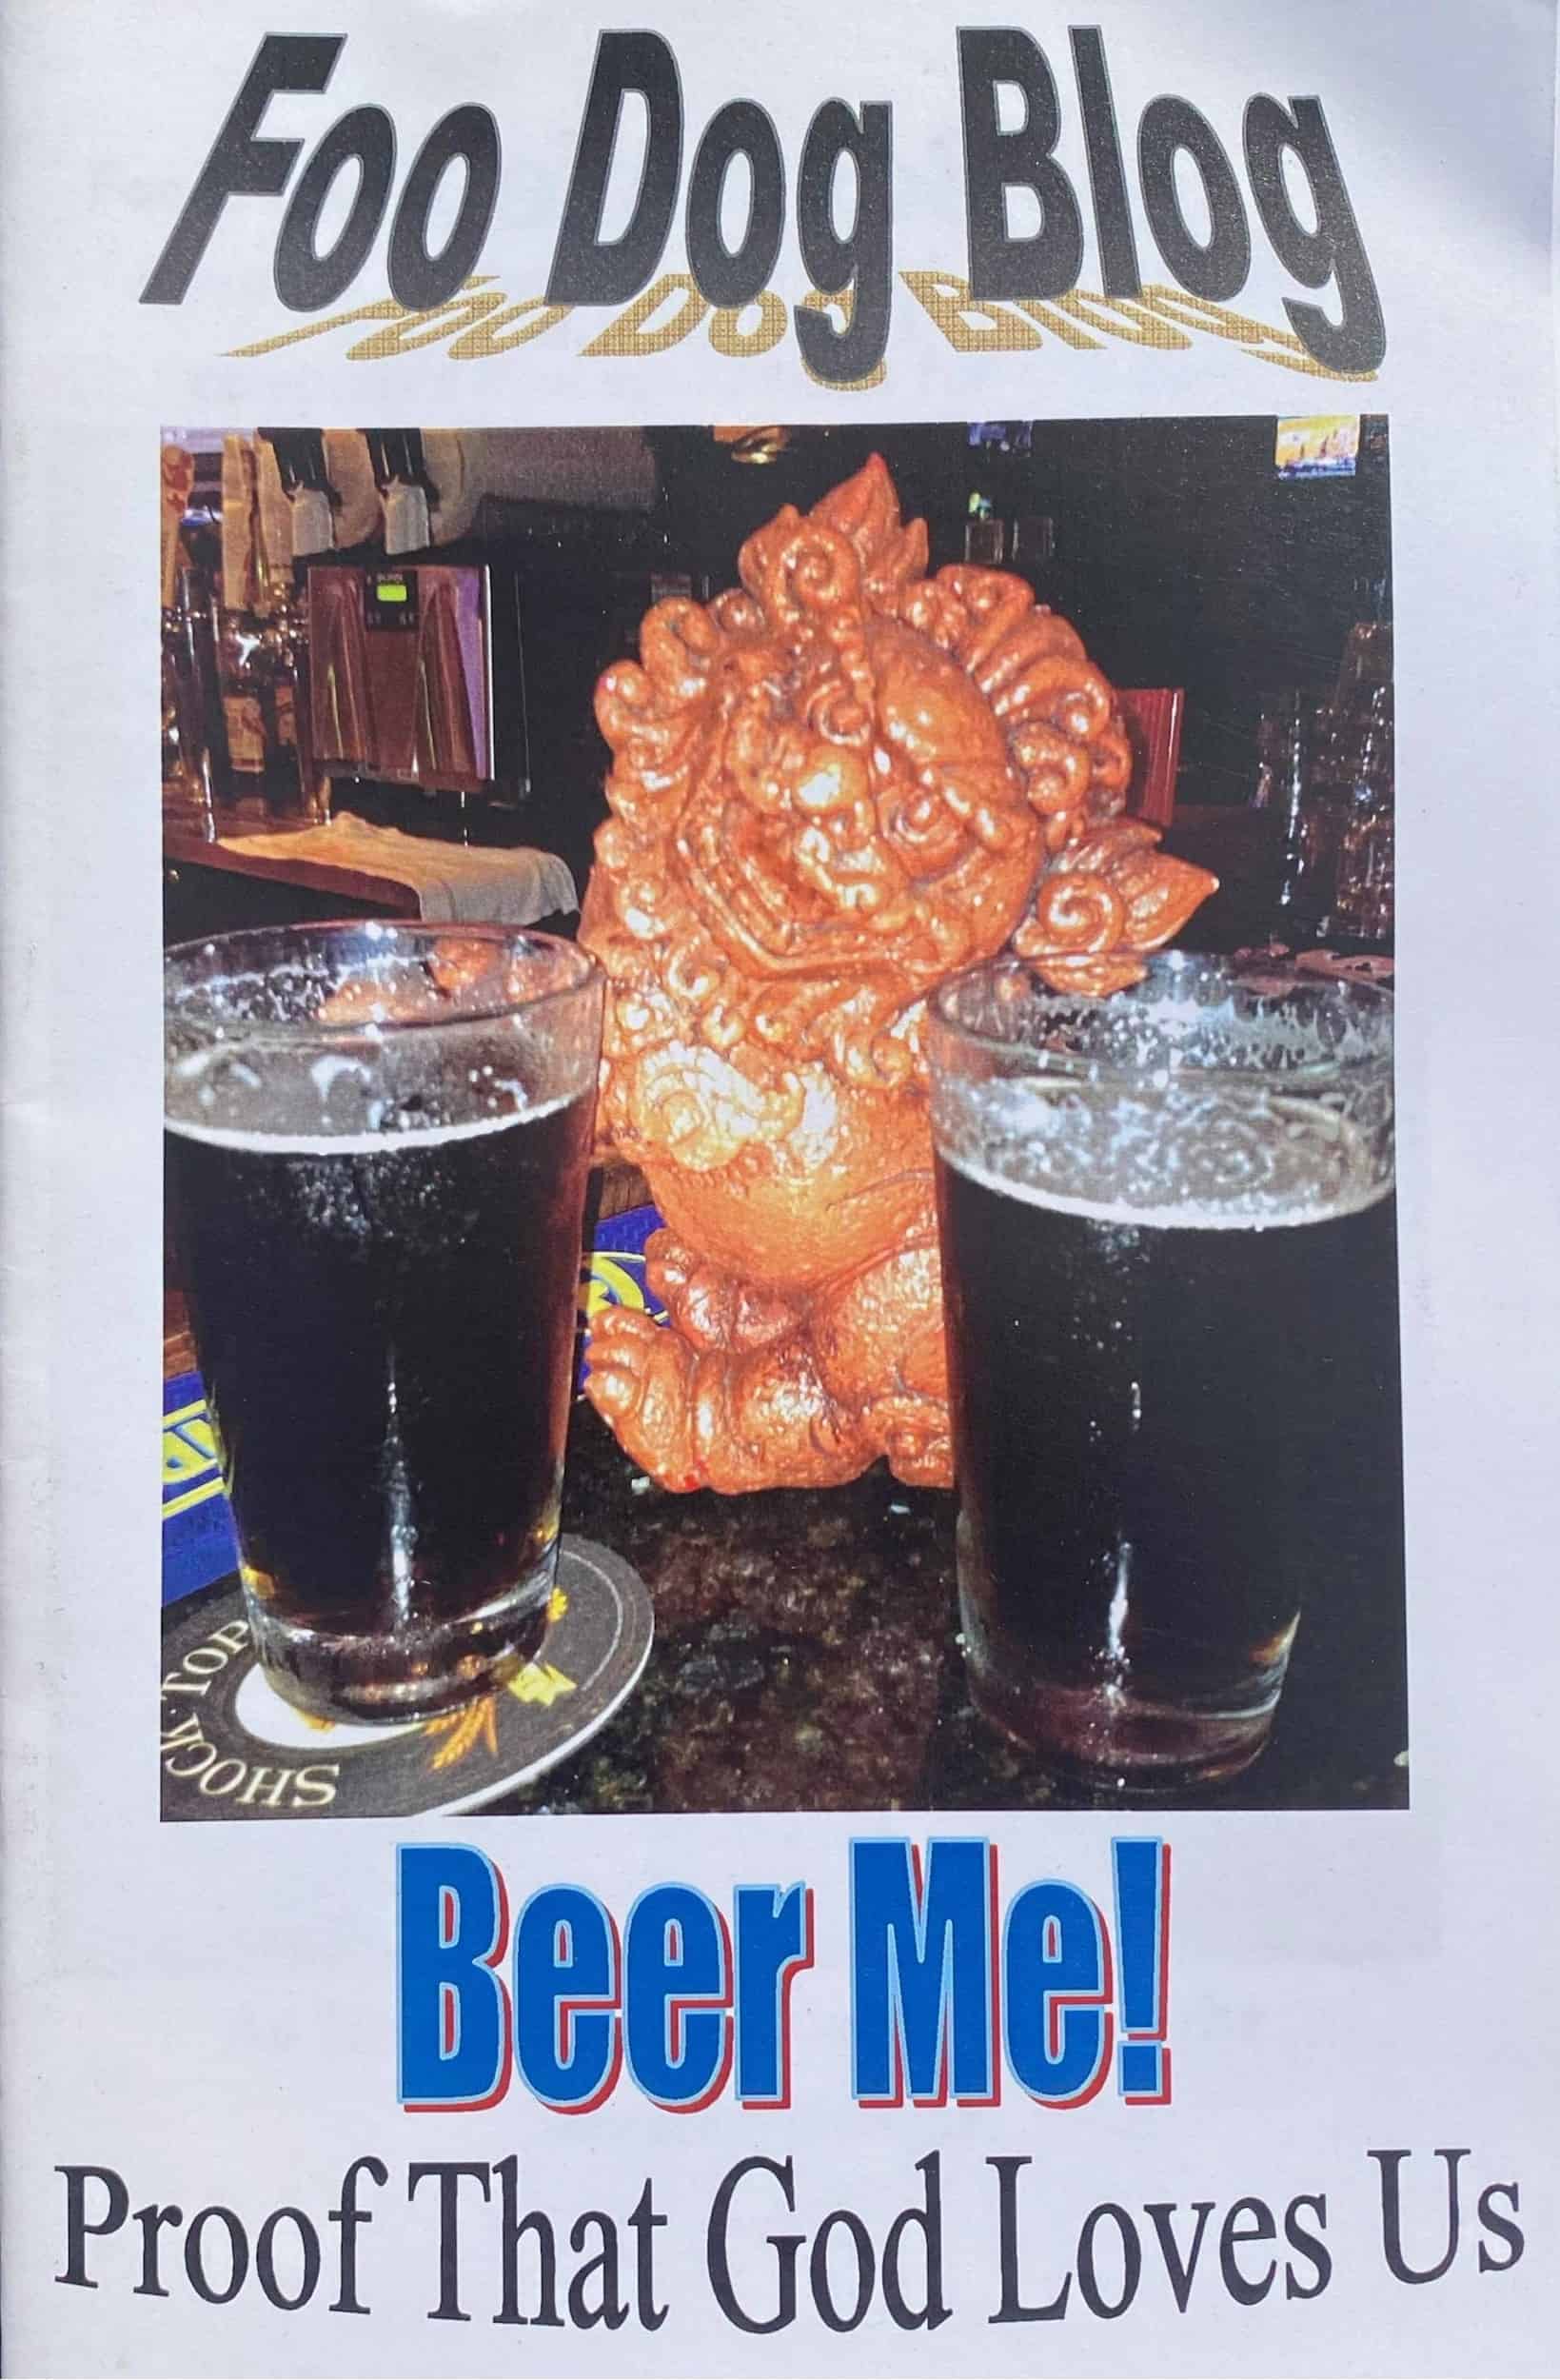 This Beer Me! Proof That God Loves Us (Foo Dog Blog Mini Book) is made with love by Victoria J. Hyla (Author)/Victorious Editing Services! Shop more unique gift ideas today with Spots Initiatives, the best way to support creators.